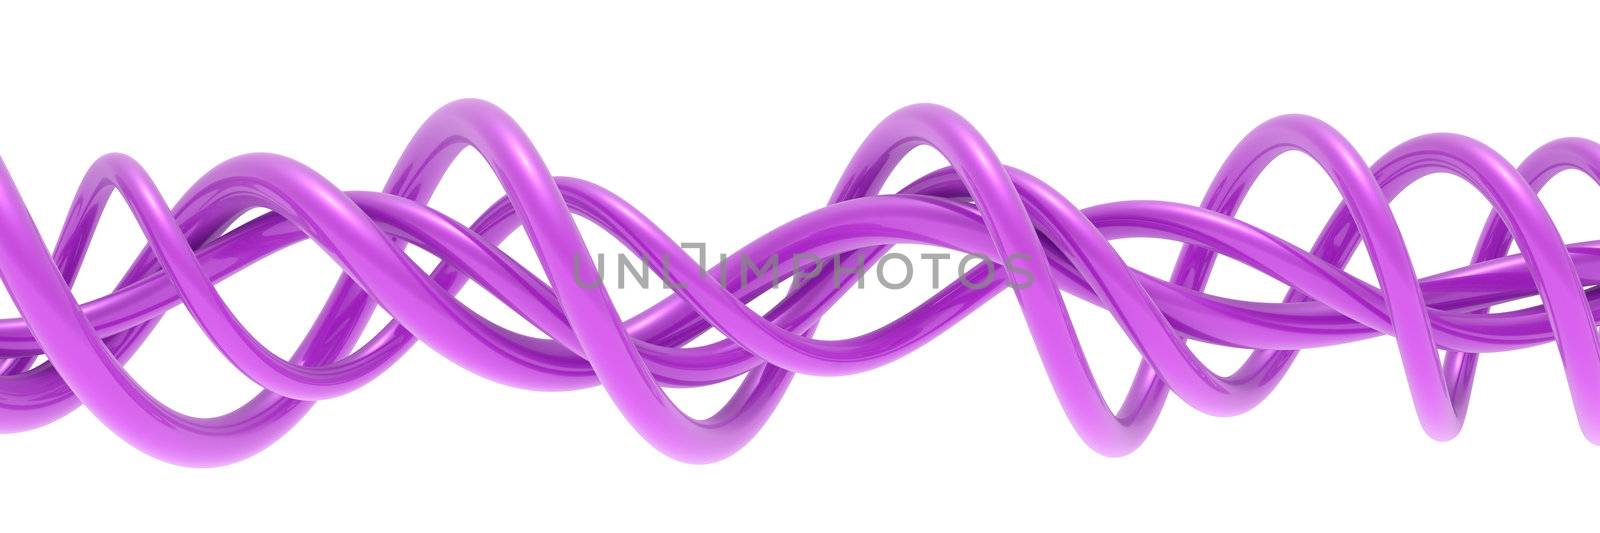 Ornate swirling abstract lilac lines isolated on white